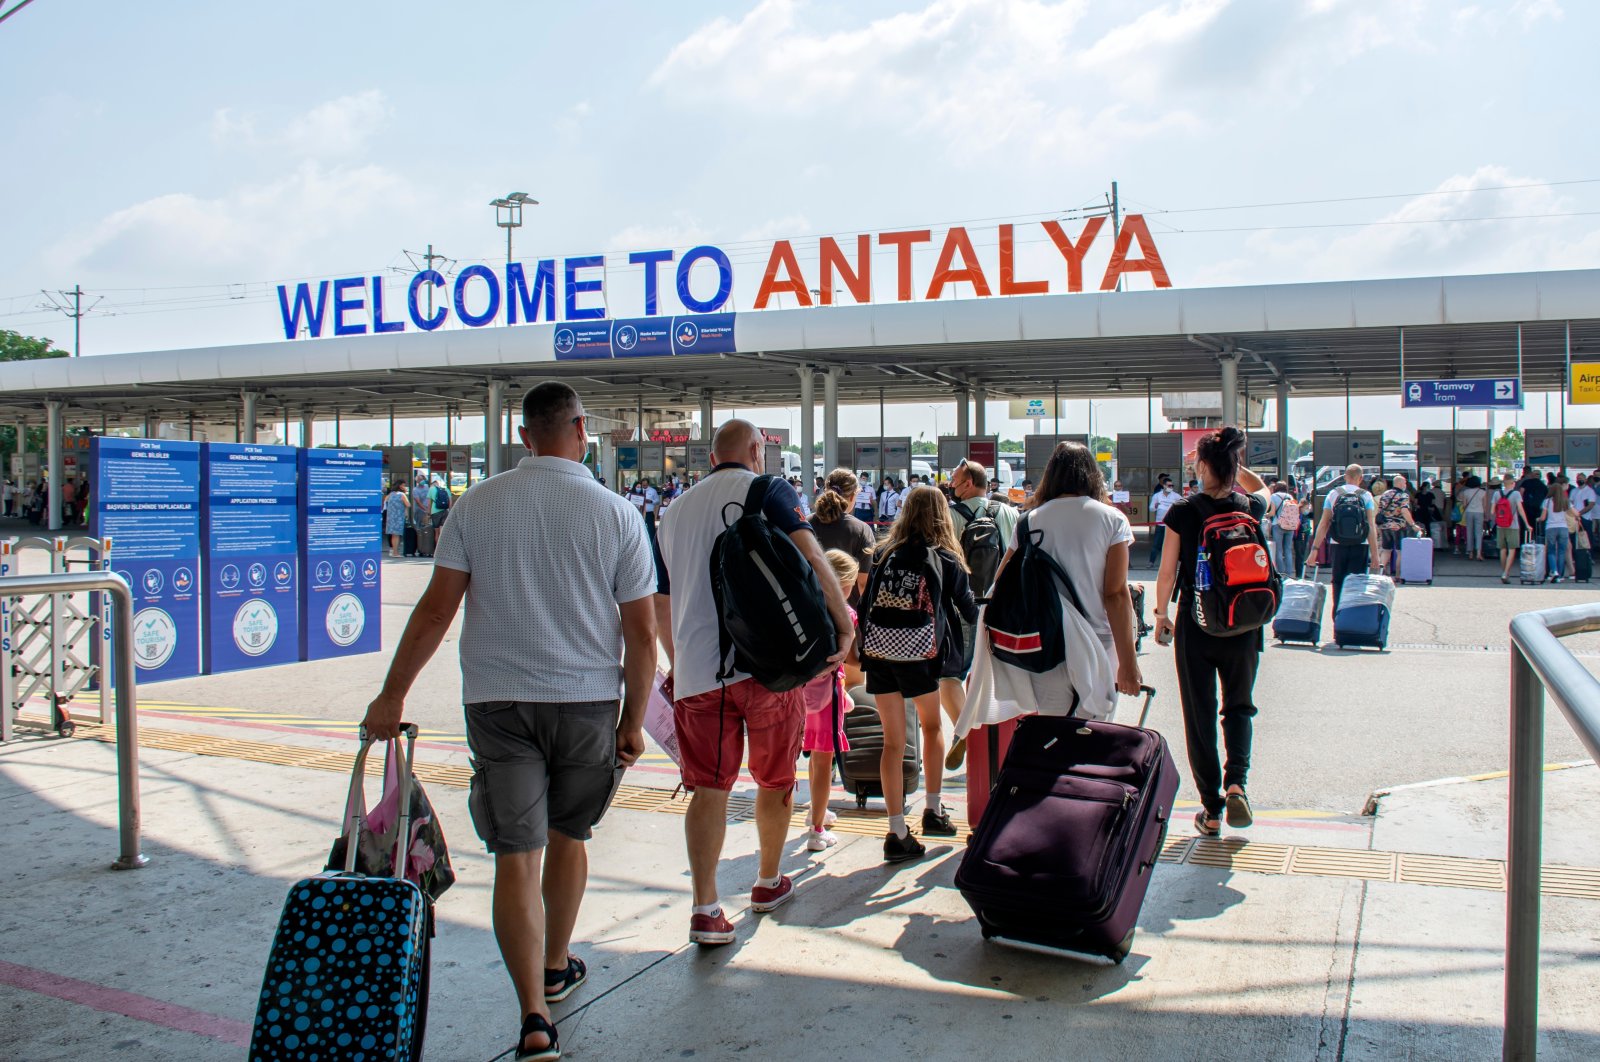 Tourists arrive at an airport in Antalya, one of the most popular tourist destinations in the Mediterranean, Turkey, May 1, 2022. (IHA Photo)